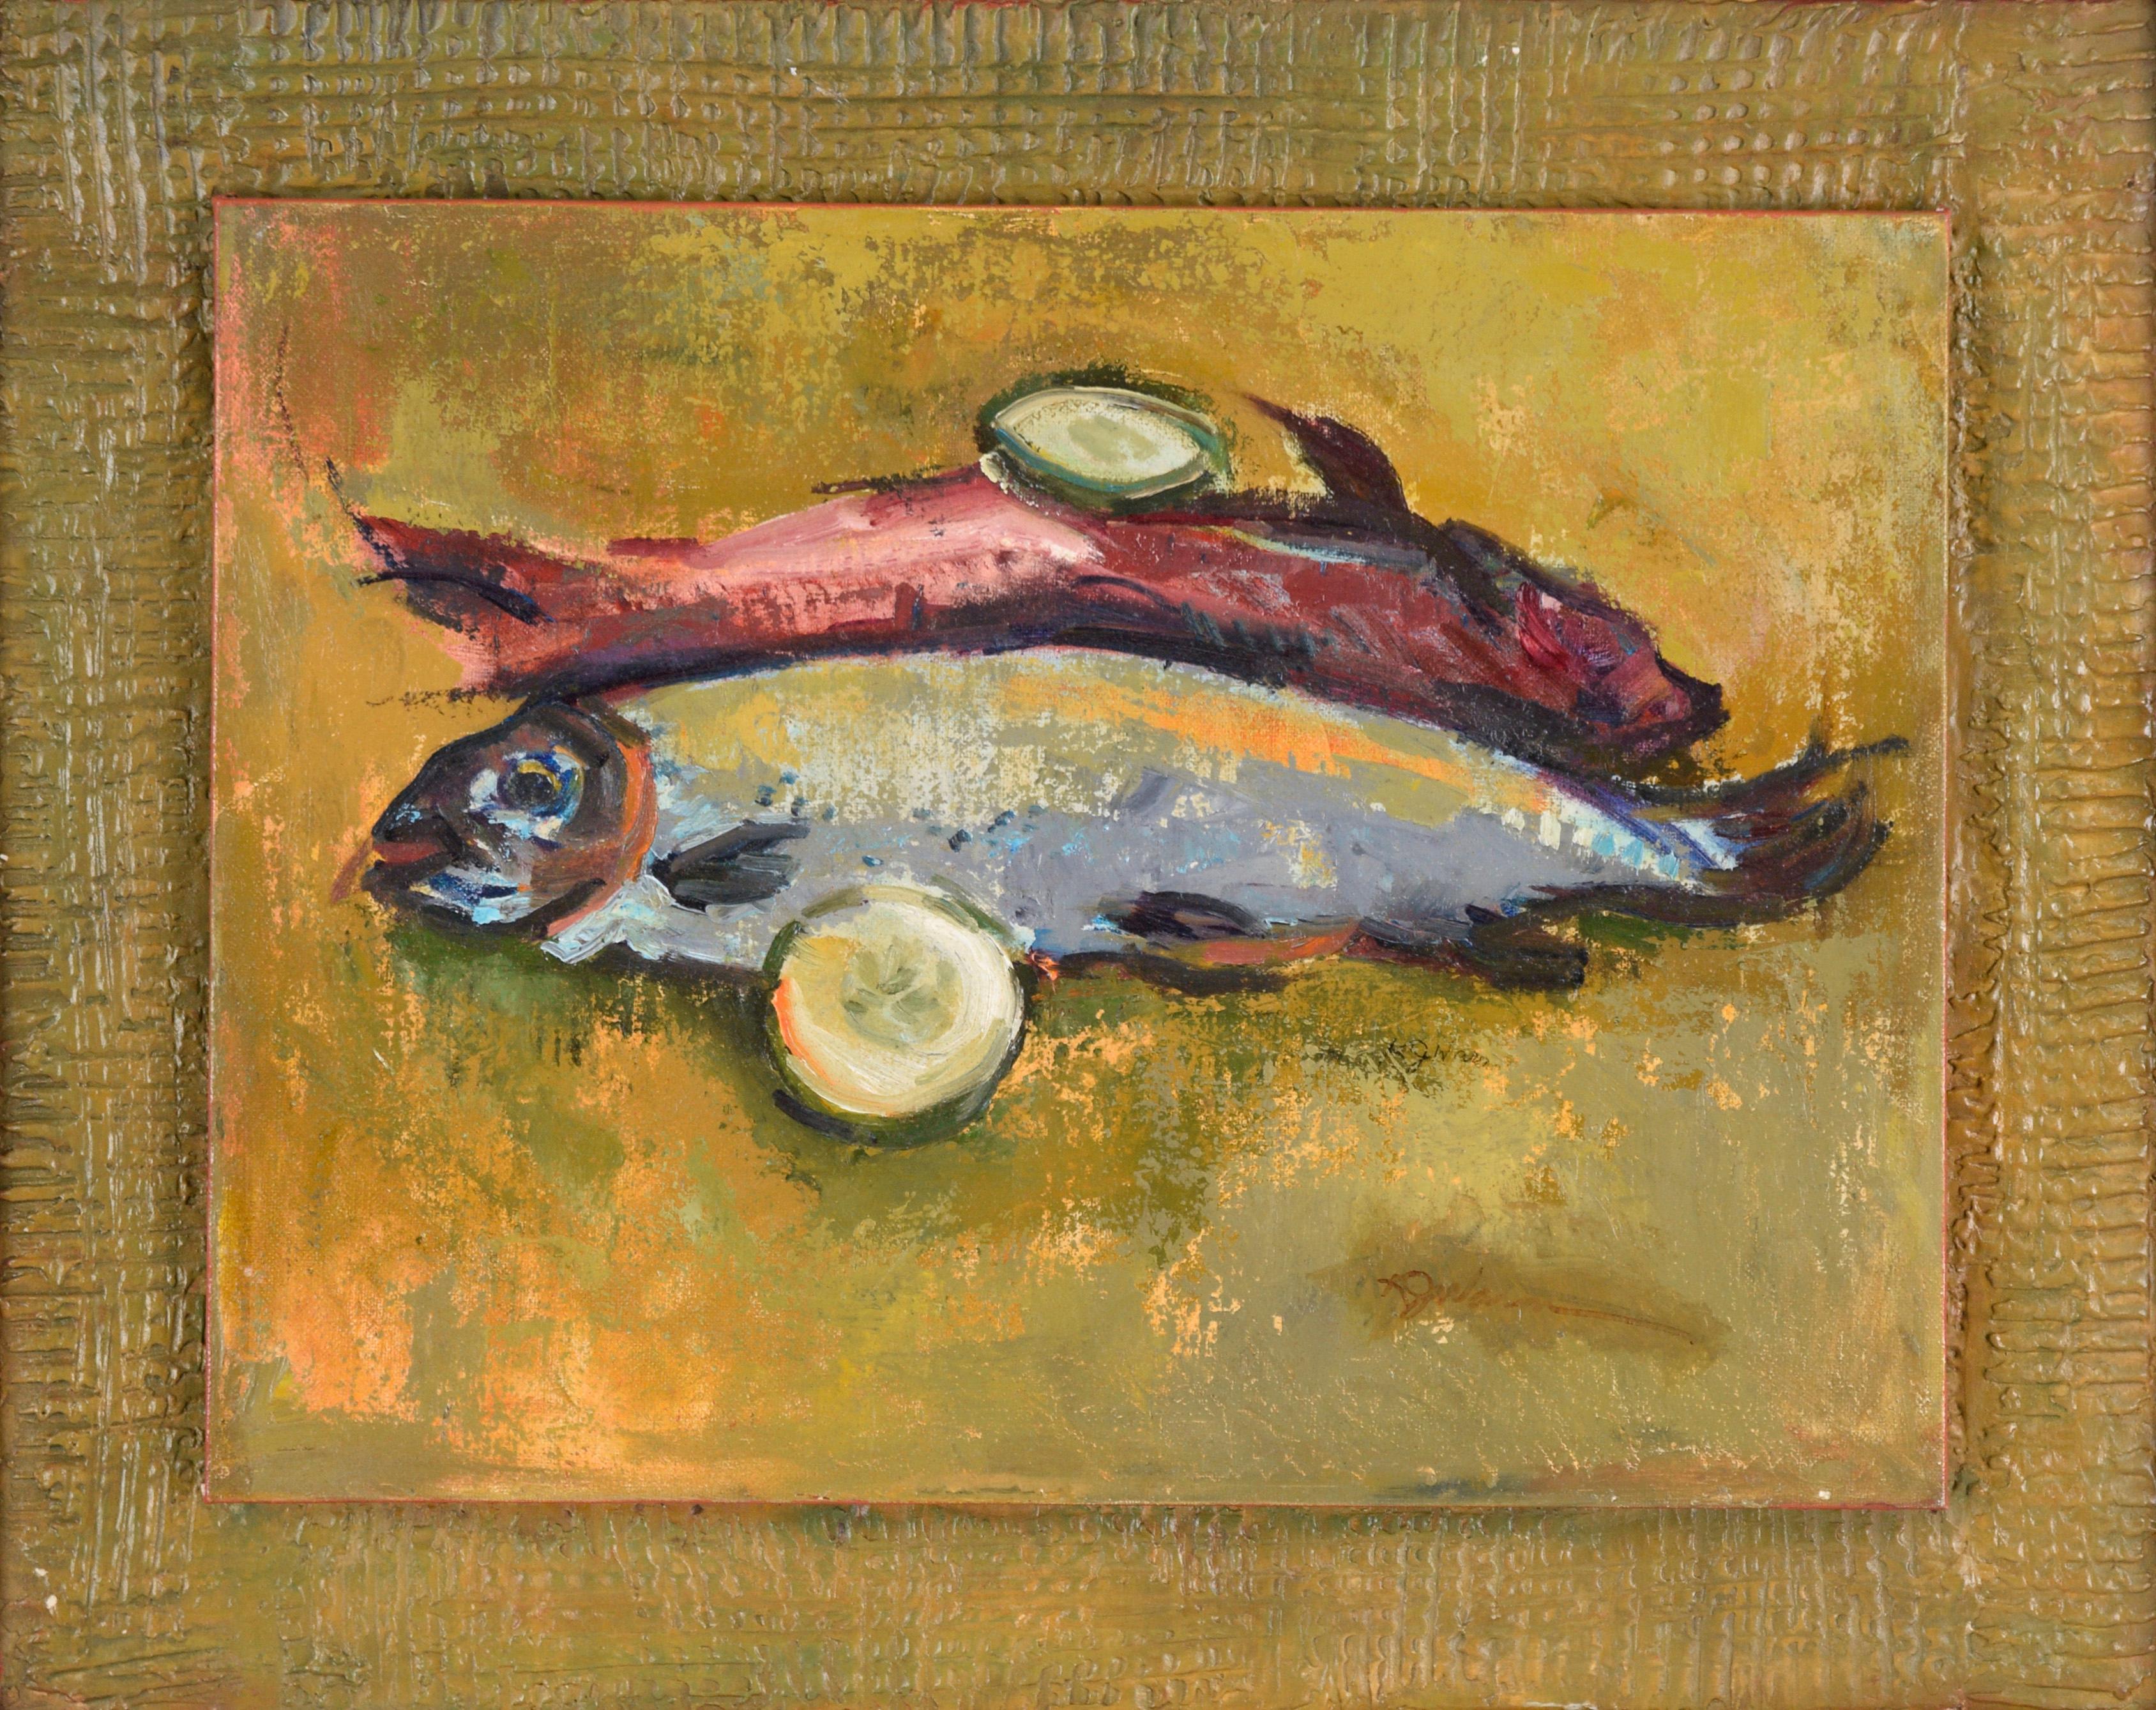 Two Cooked Fish with Garnish - Still Life in Oil on Artist's Board - Painting by Unknown